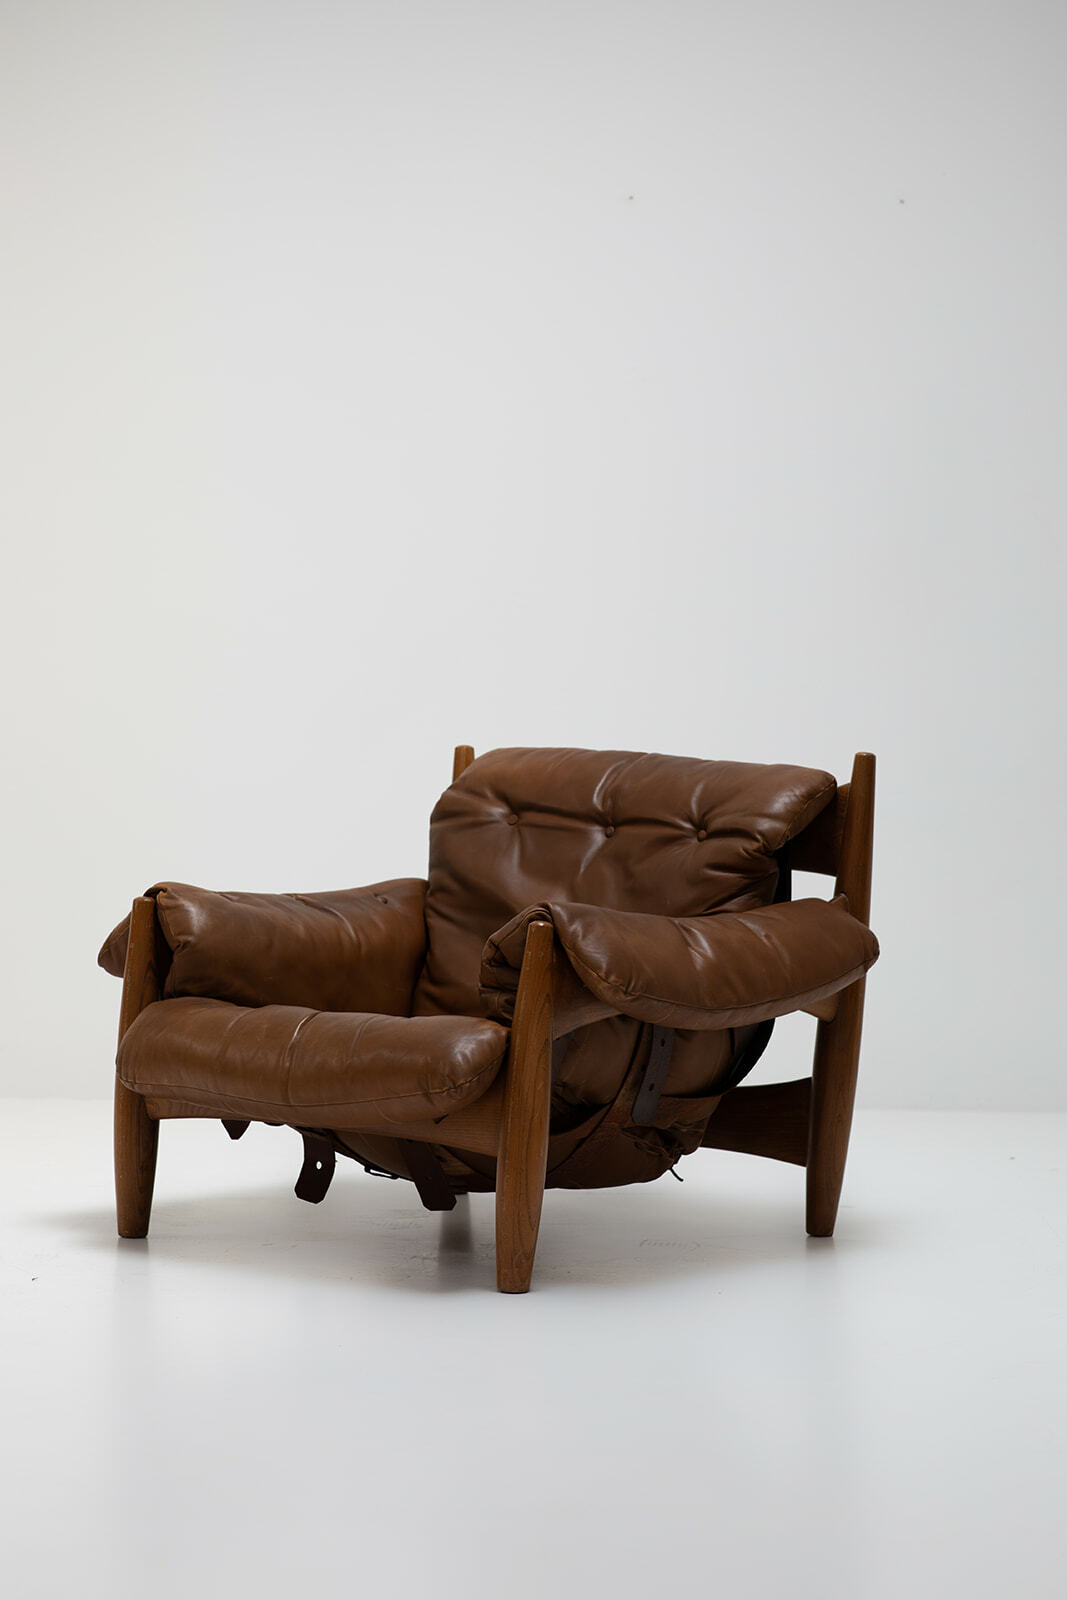 Sergio Rodrigues 'Sheriff' lounge chair